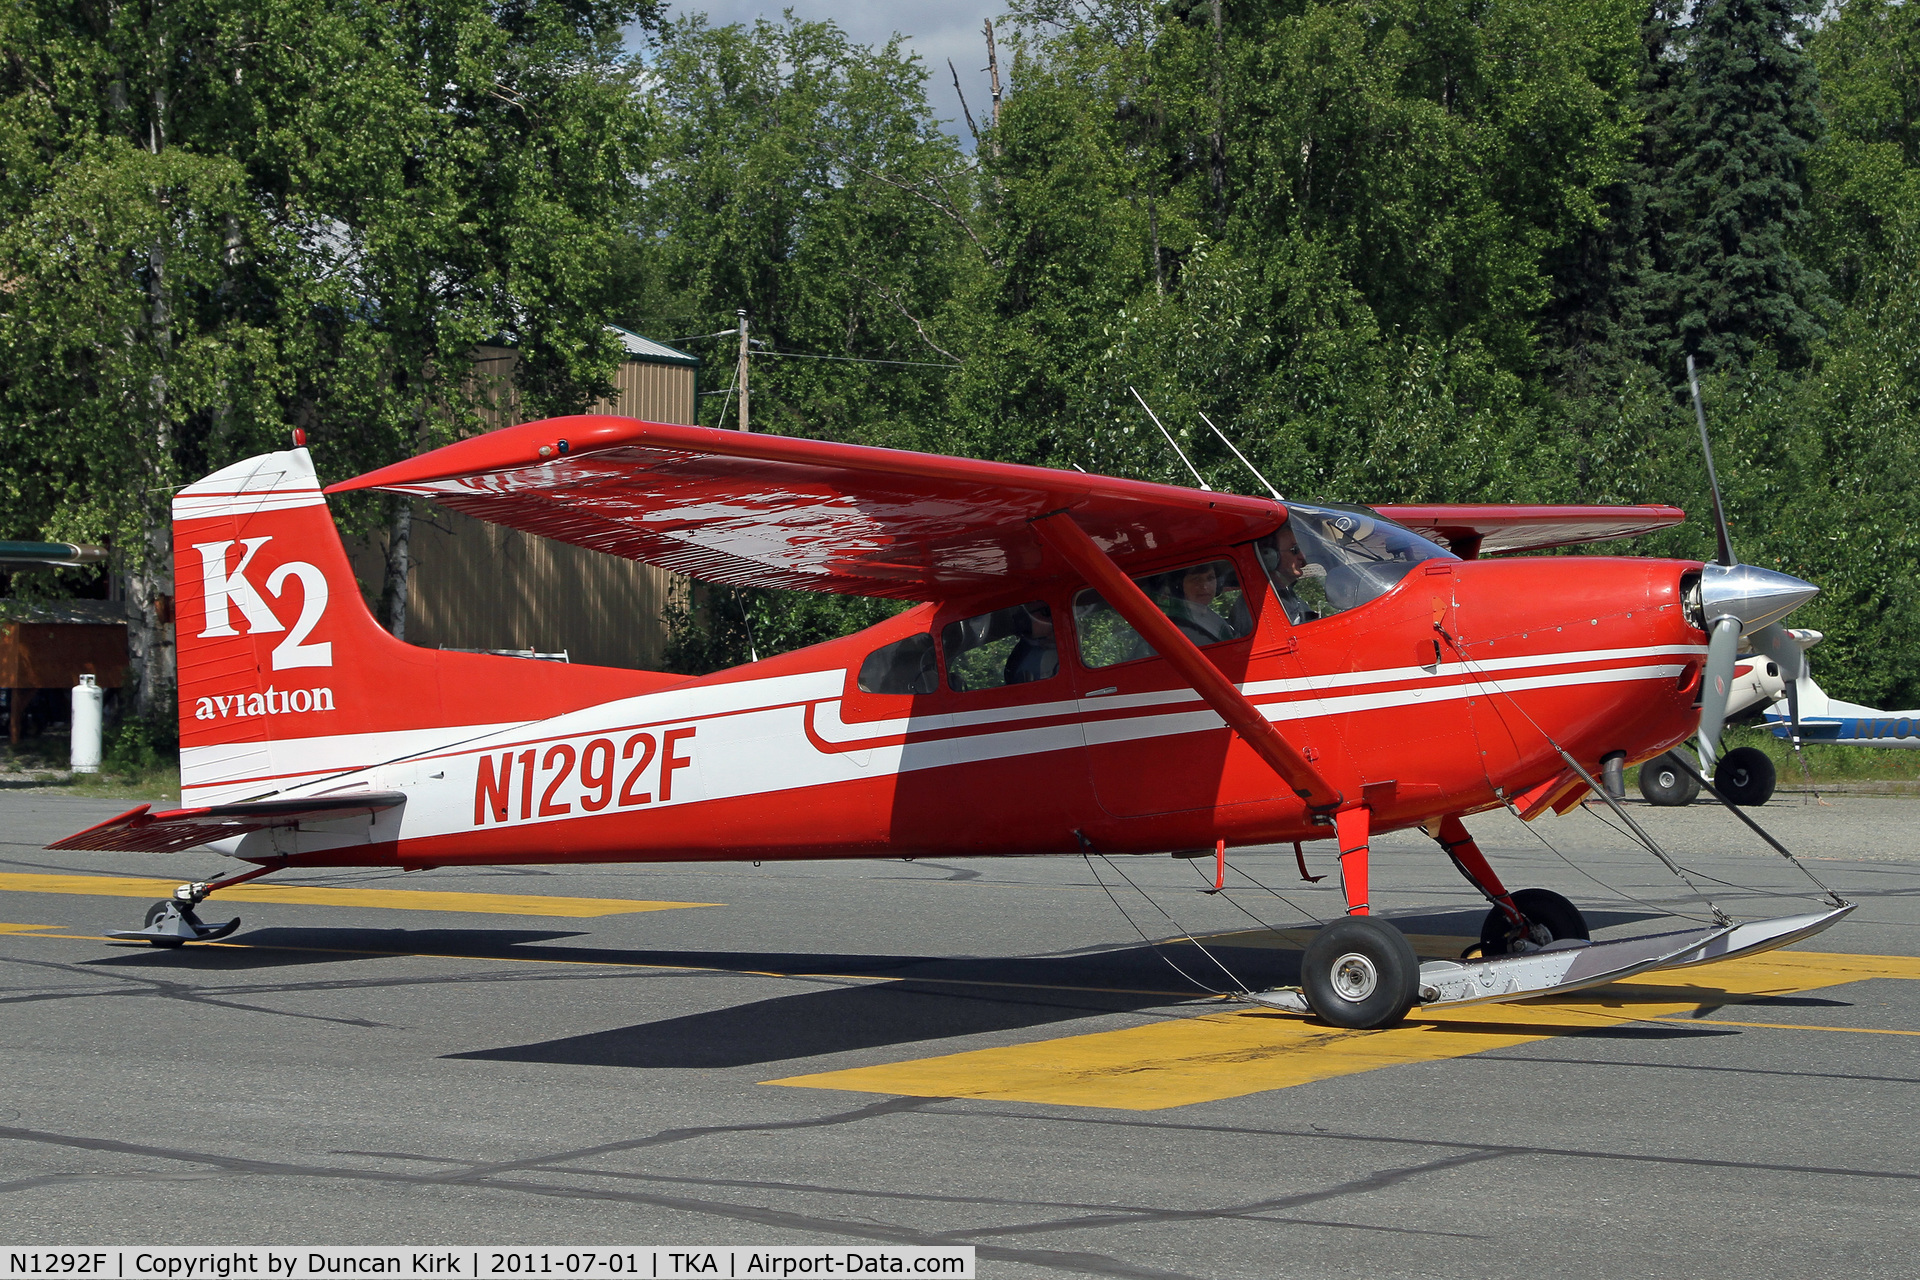 N1292F, 1975 Cessna A185F Skywagon 185 C/N 18502668, K2 has quite the business going on in Talkeetna with a variety of types